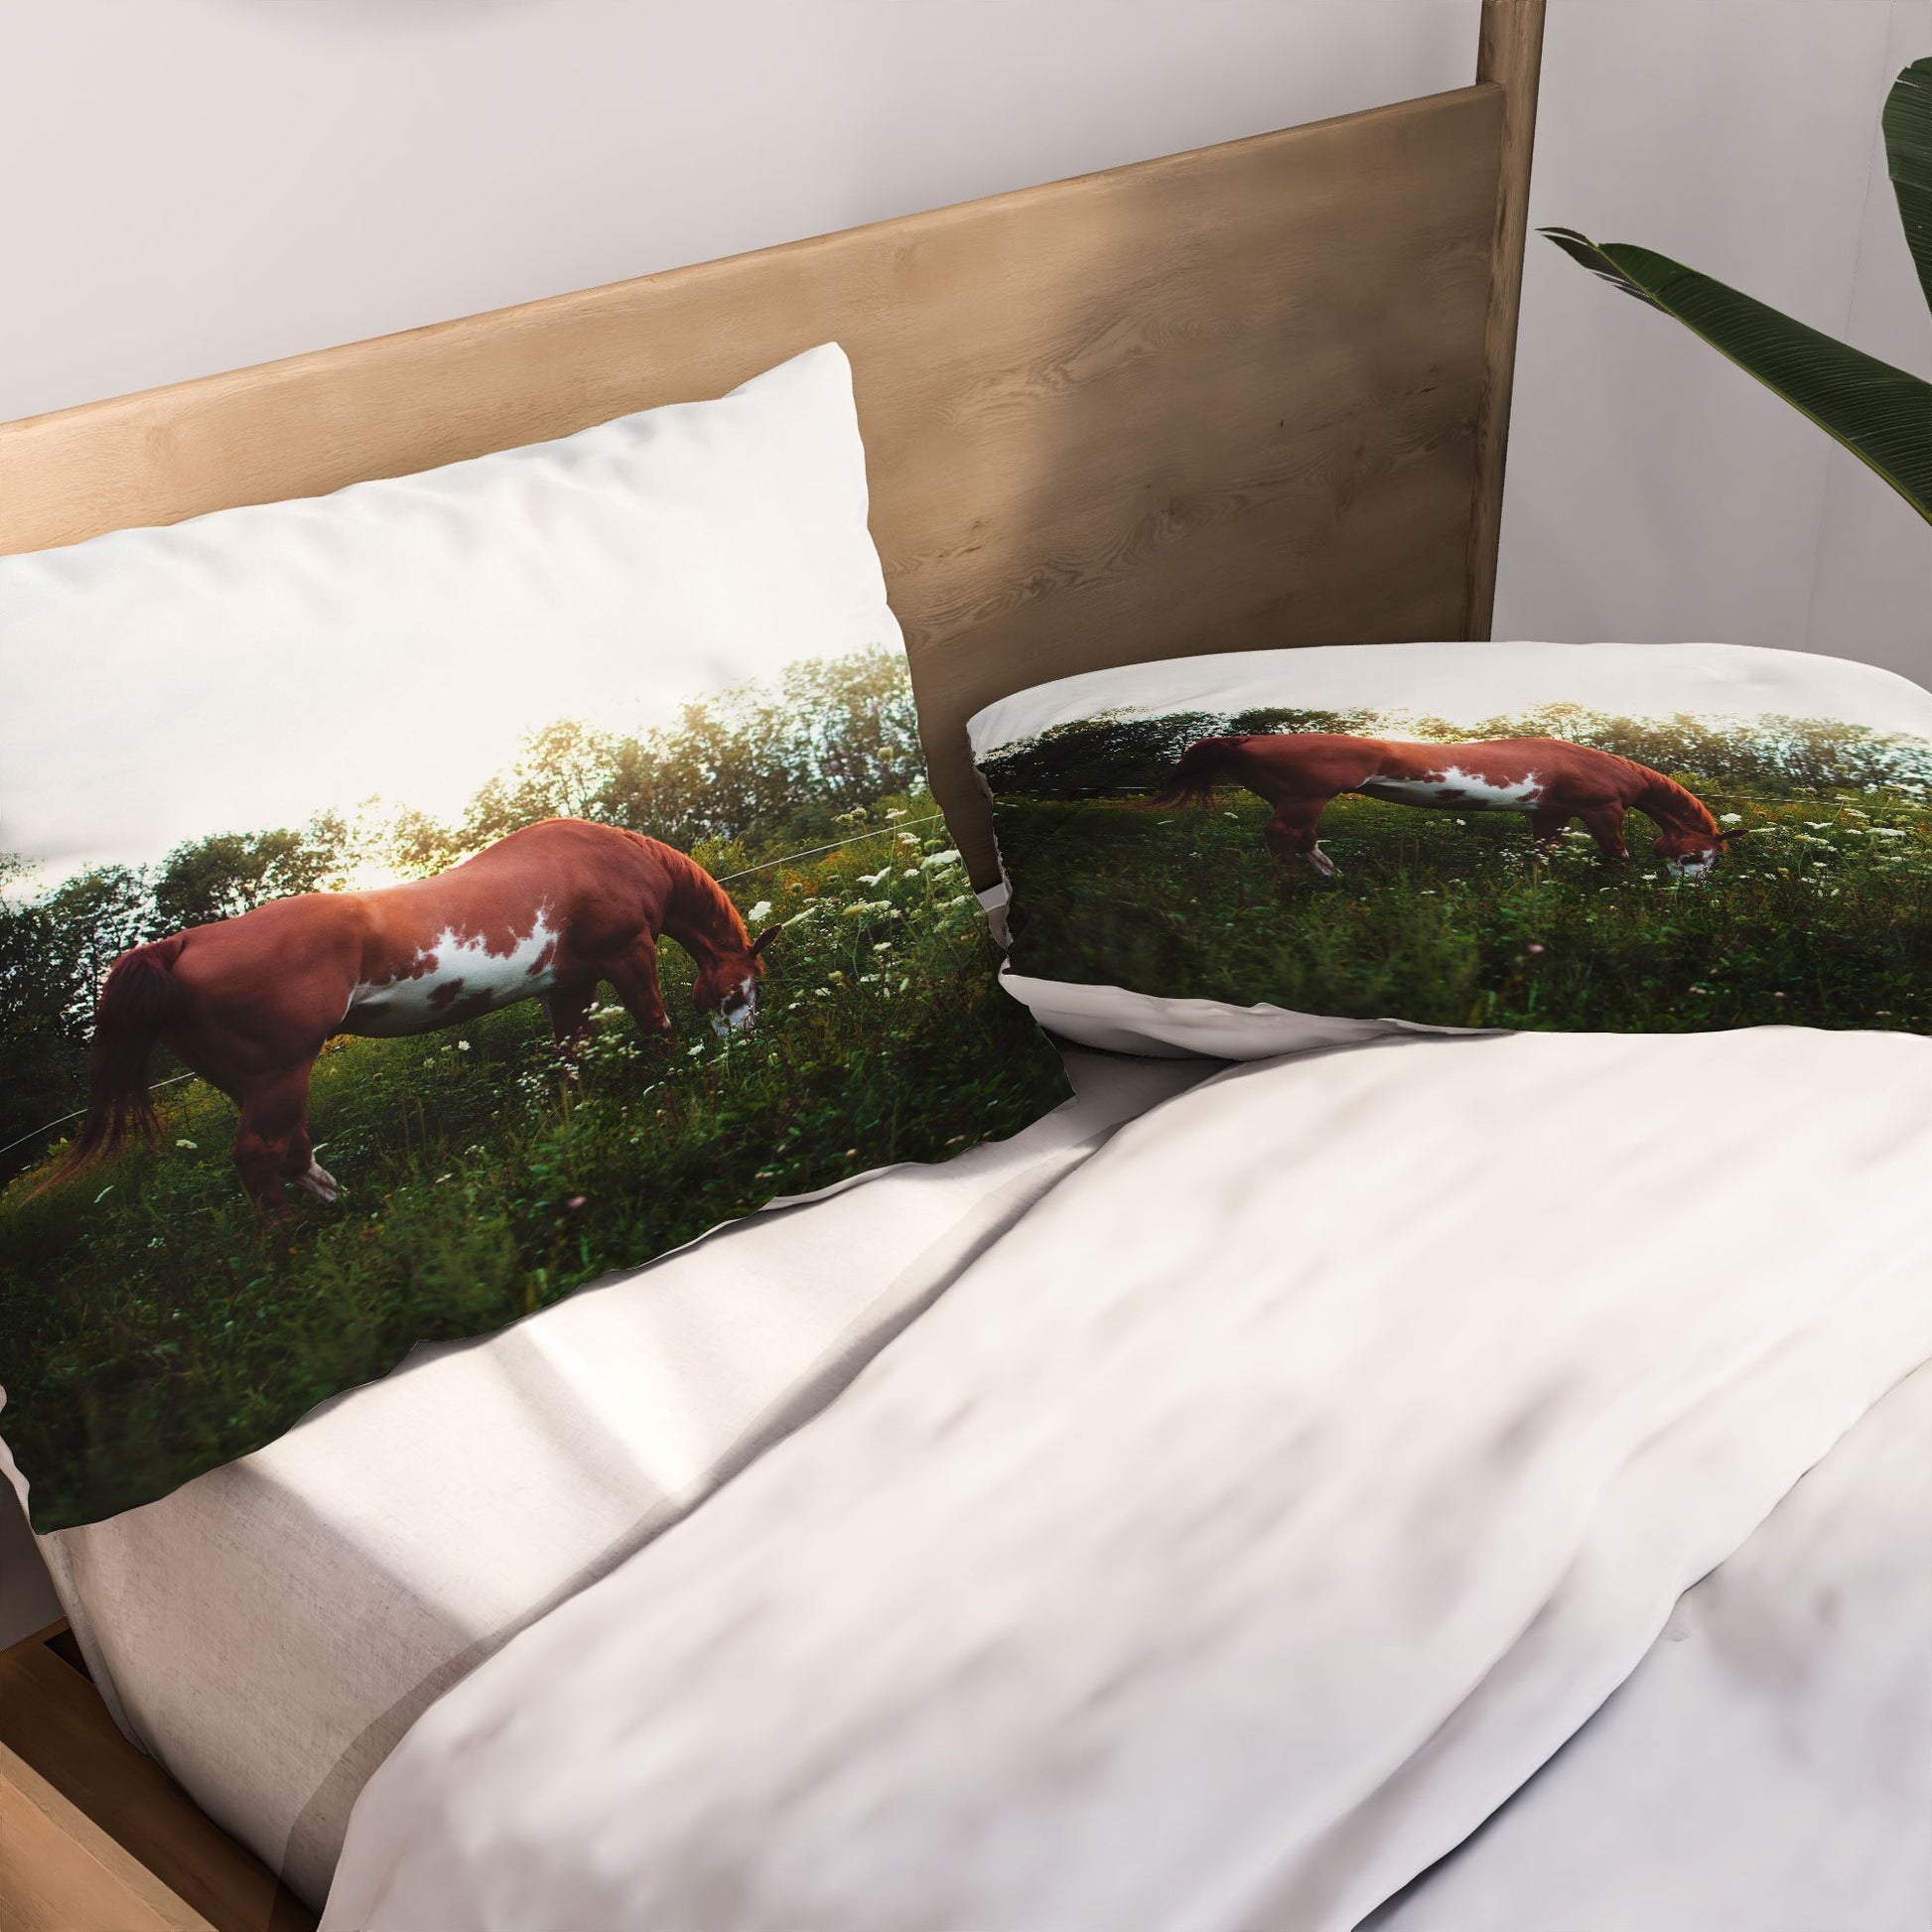 Paint Horse Bed In A Bag - azteccomforter, bed, bed in a bag, bedding, beddinng, bedinabag, bedroom, bedspread, blanket, comforter, decor, home, home decor, homedecor, horse, horses, paint, paint horse, paint horses, painted stallion, painthorse, southwestern, southwesterndecor, southwesternhome, southwesternhomedecor, wesern, western, western bedding, western decor, western home decor, westernbedding, westerndecor, westernhomedecor, working horse -  - Baha Ranch Western Wear